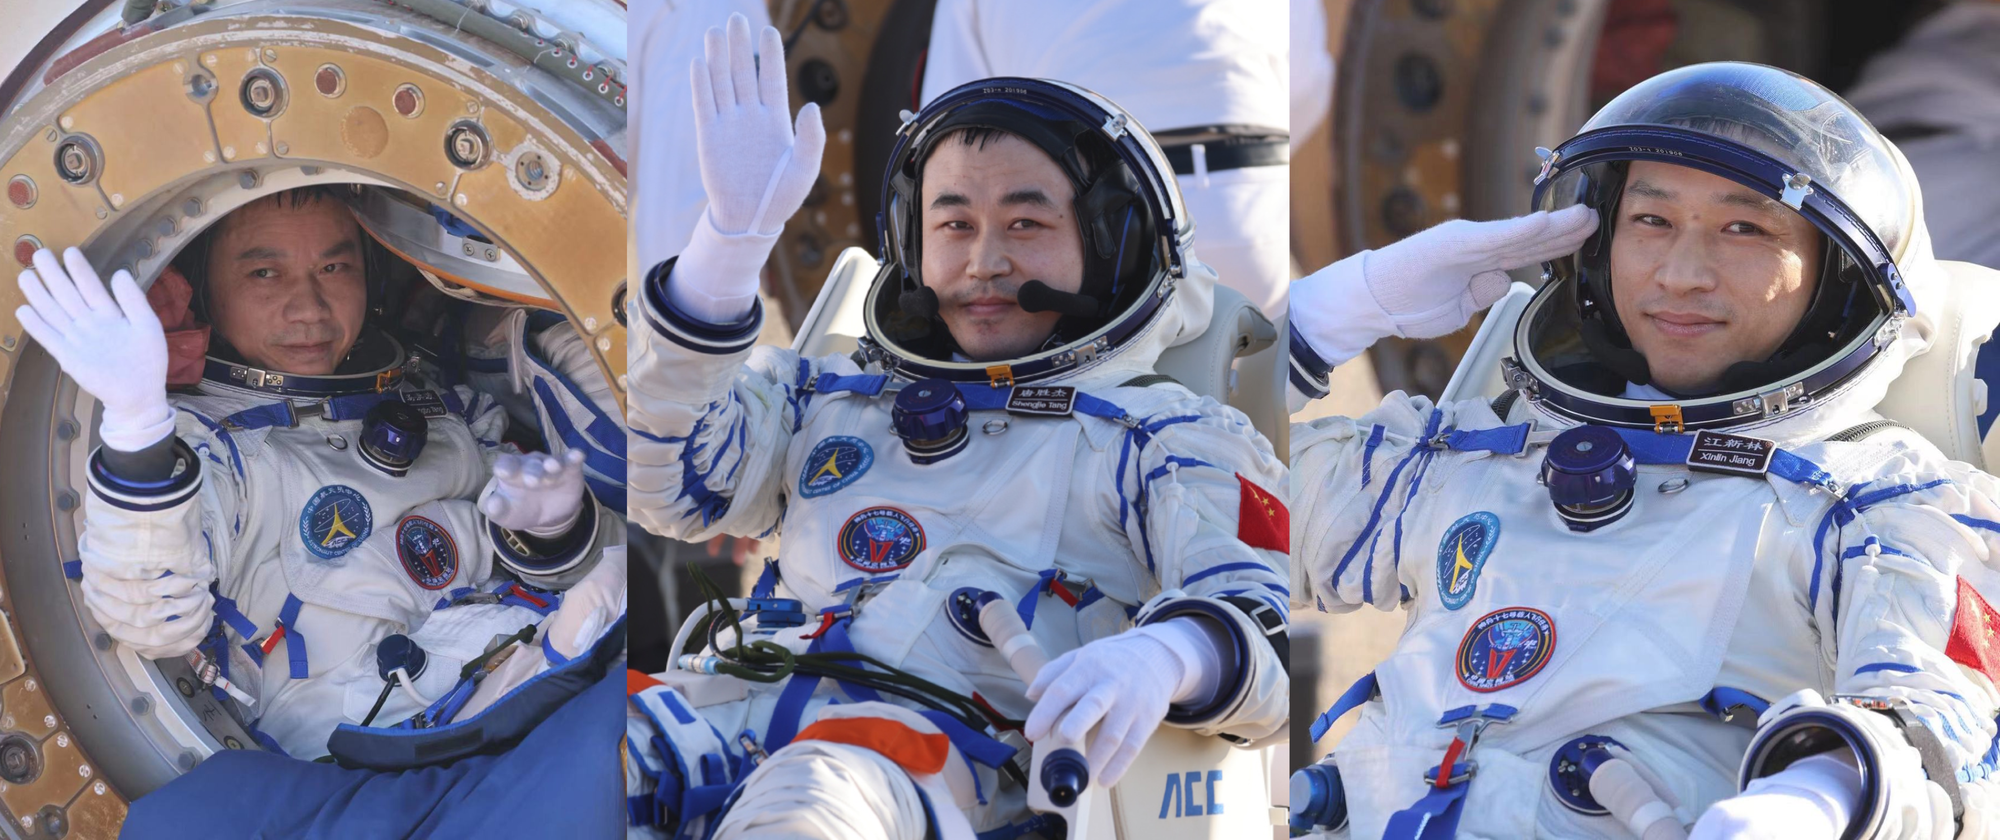 Tang Hongbo emerging from the Shenzhou-17 capsule (left), Tang Shengjie after being recovered from the capsule (center), and Jiang Xinlin also after being recovered from the capsule (right). ©Xinhua